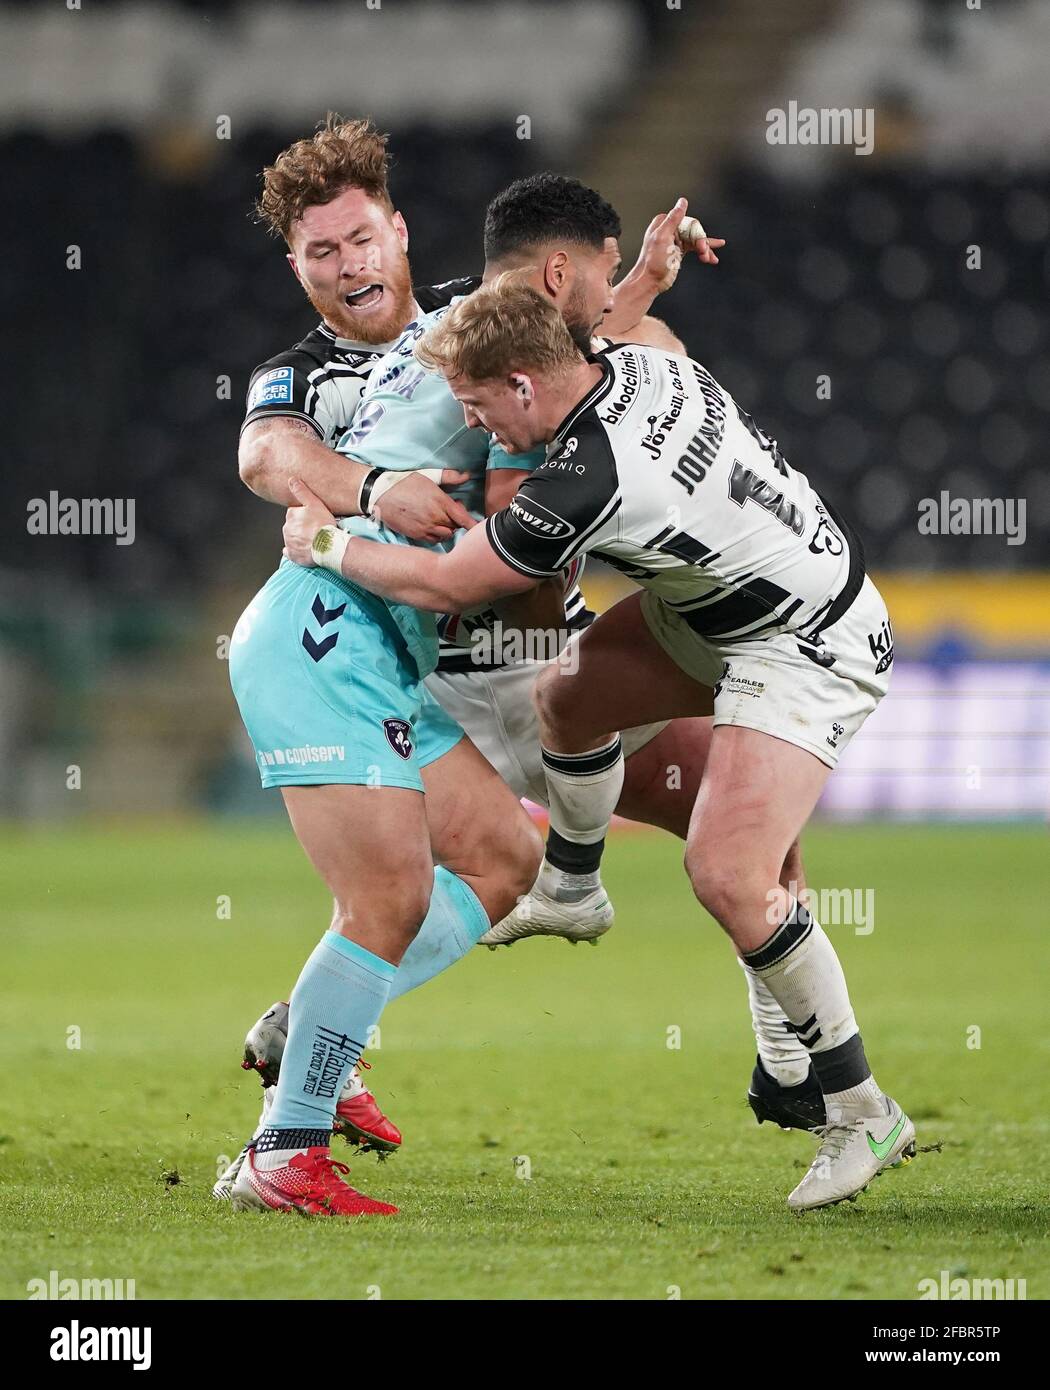 Hull FC's Scott Taylor and Jordan Johnstone tackle Wakefield Trinity's Kelepi Tanginoa during the Betfred Super League match at the KCOM Stadium, Hull. Picture date: Friday April 23, 2021. Stock Photo